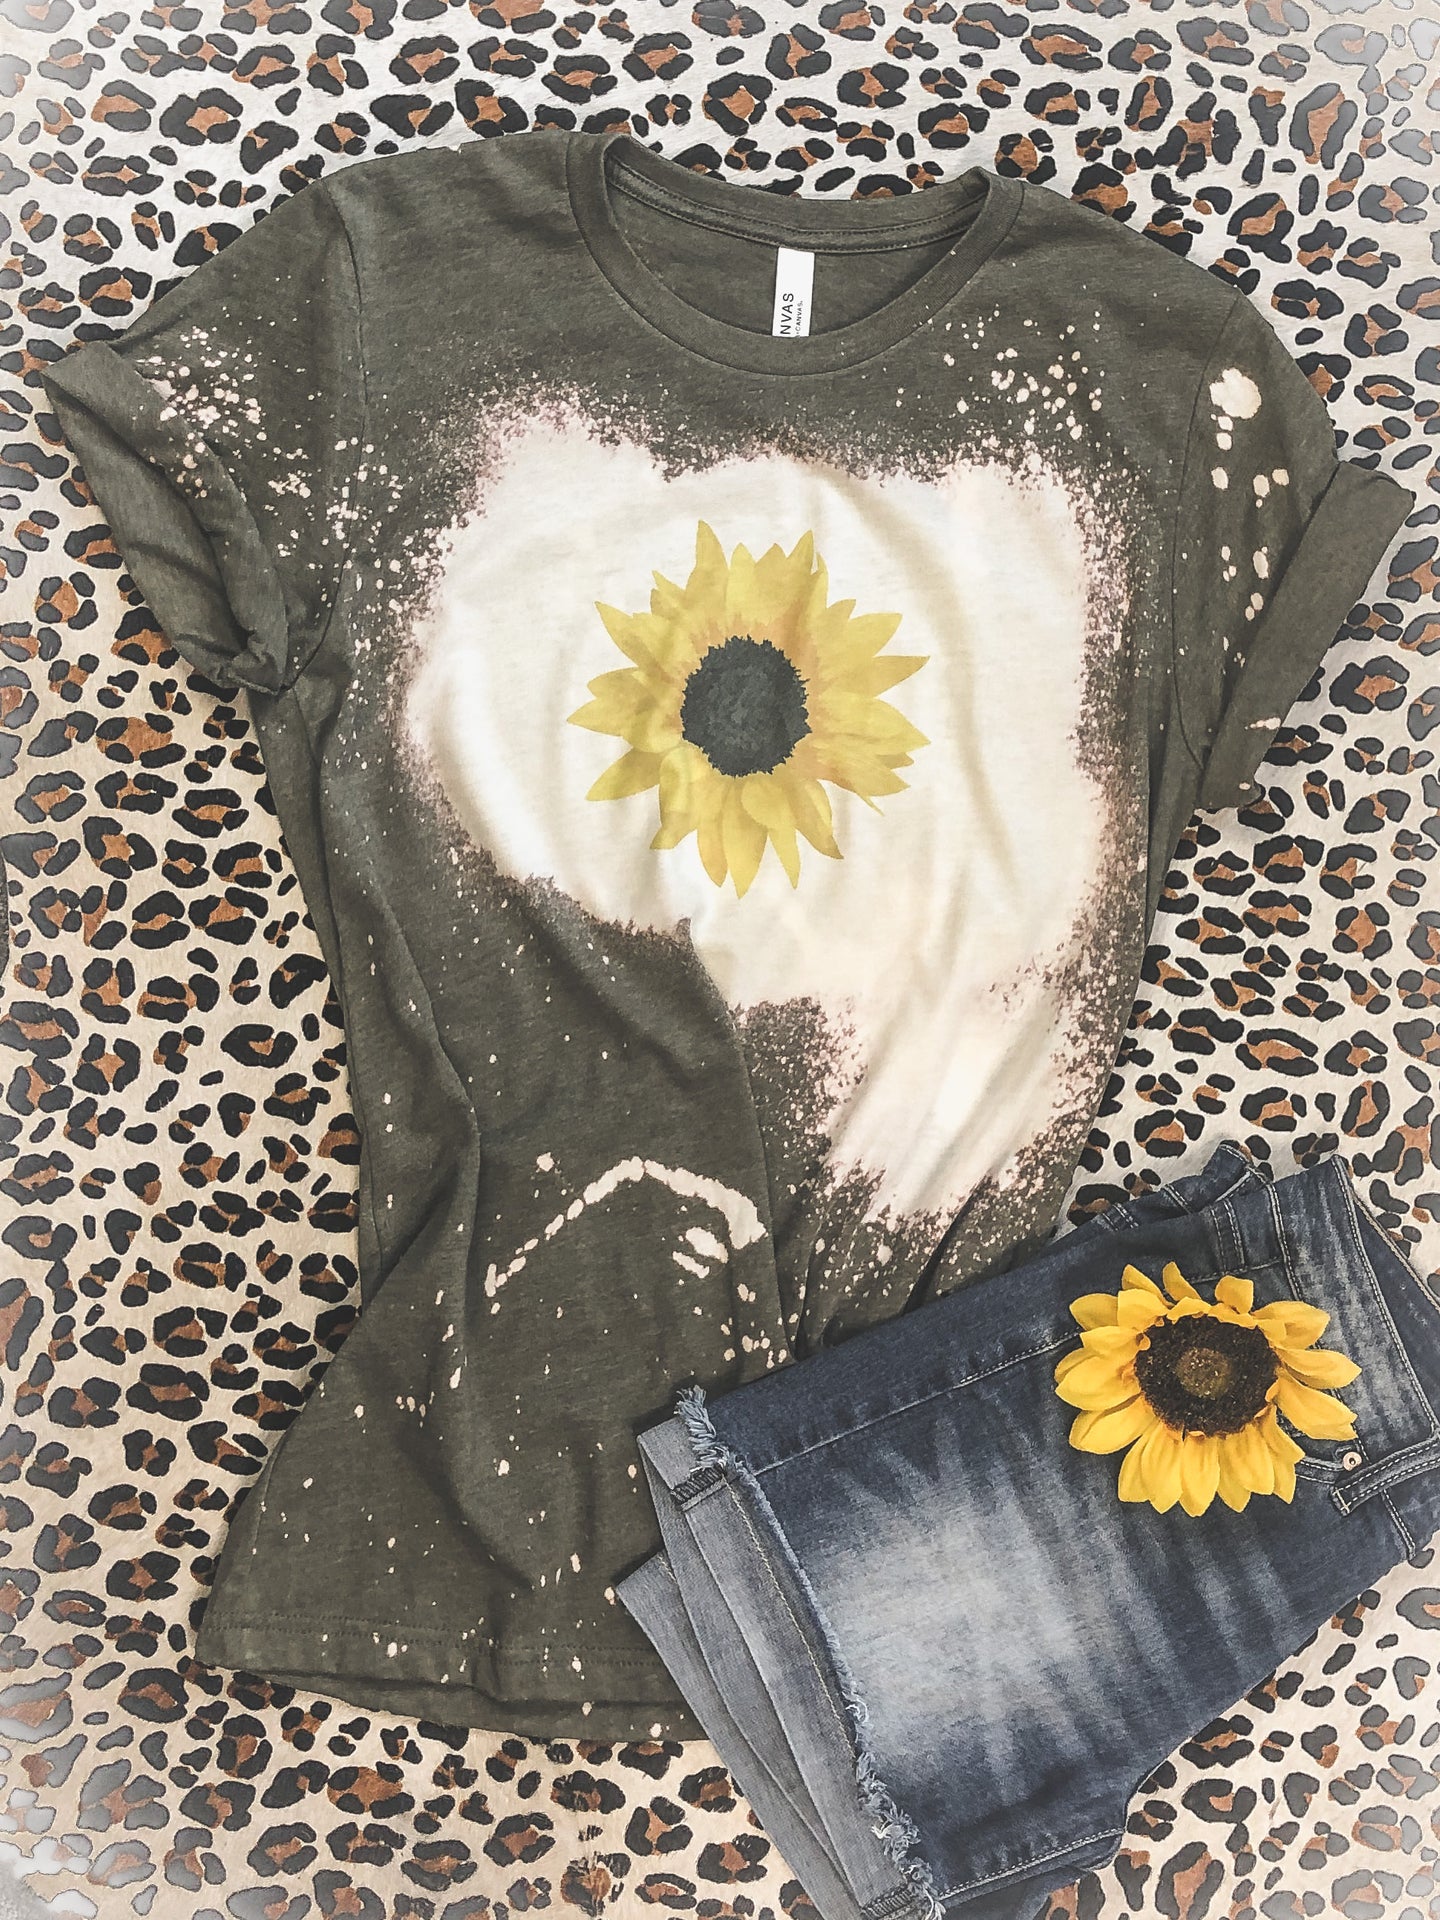 Sunflower Tee - made in the USA